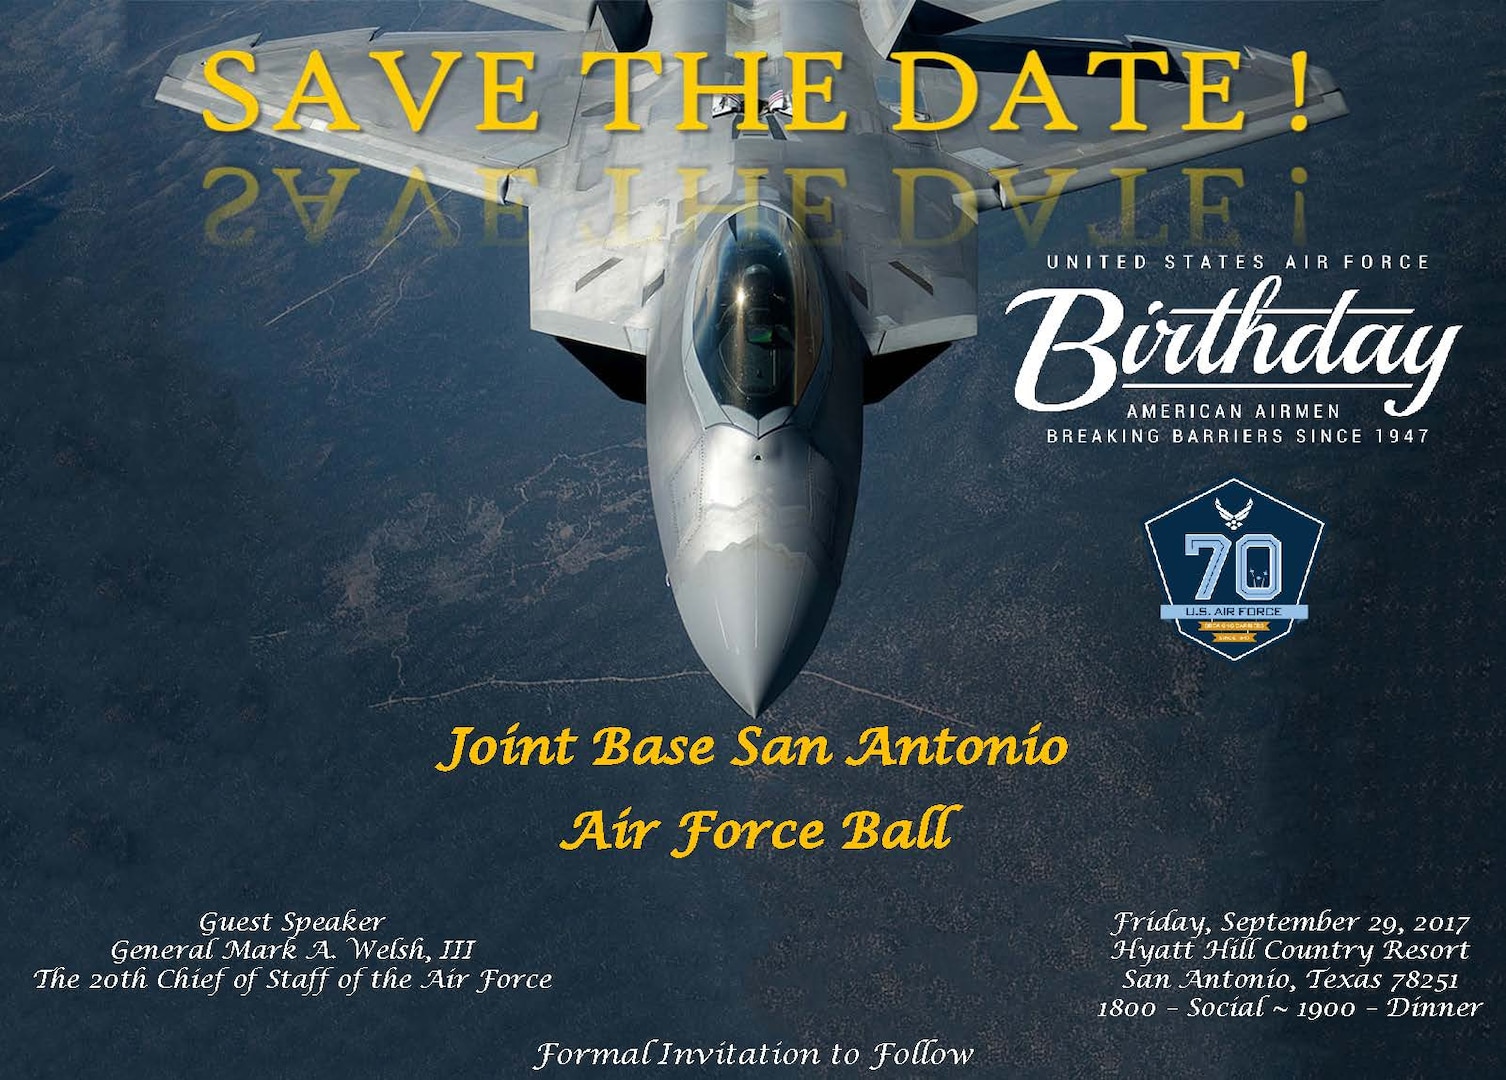 The Air Force Ball be held Sept. 29, 2017 in celebration of the service's 70th birthday.  Former 20th Chief of Staff of the Air Force, retired Gen. Mark A. Welsh III, will be the guest speaker. (Courtesy Graphic)